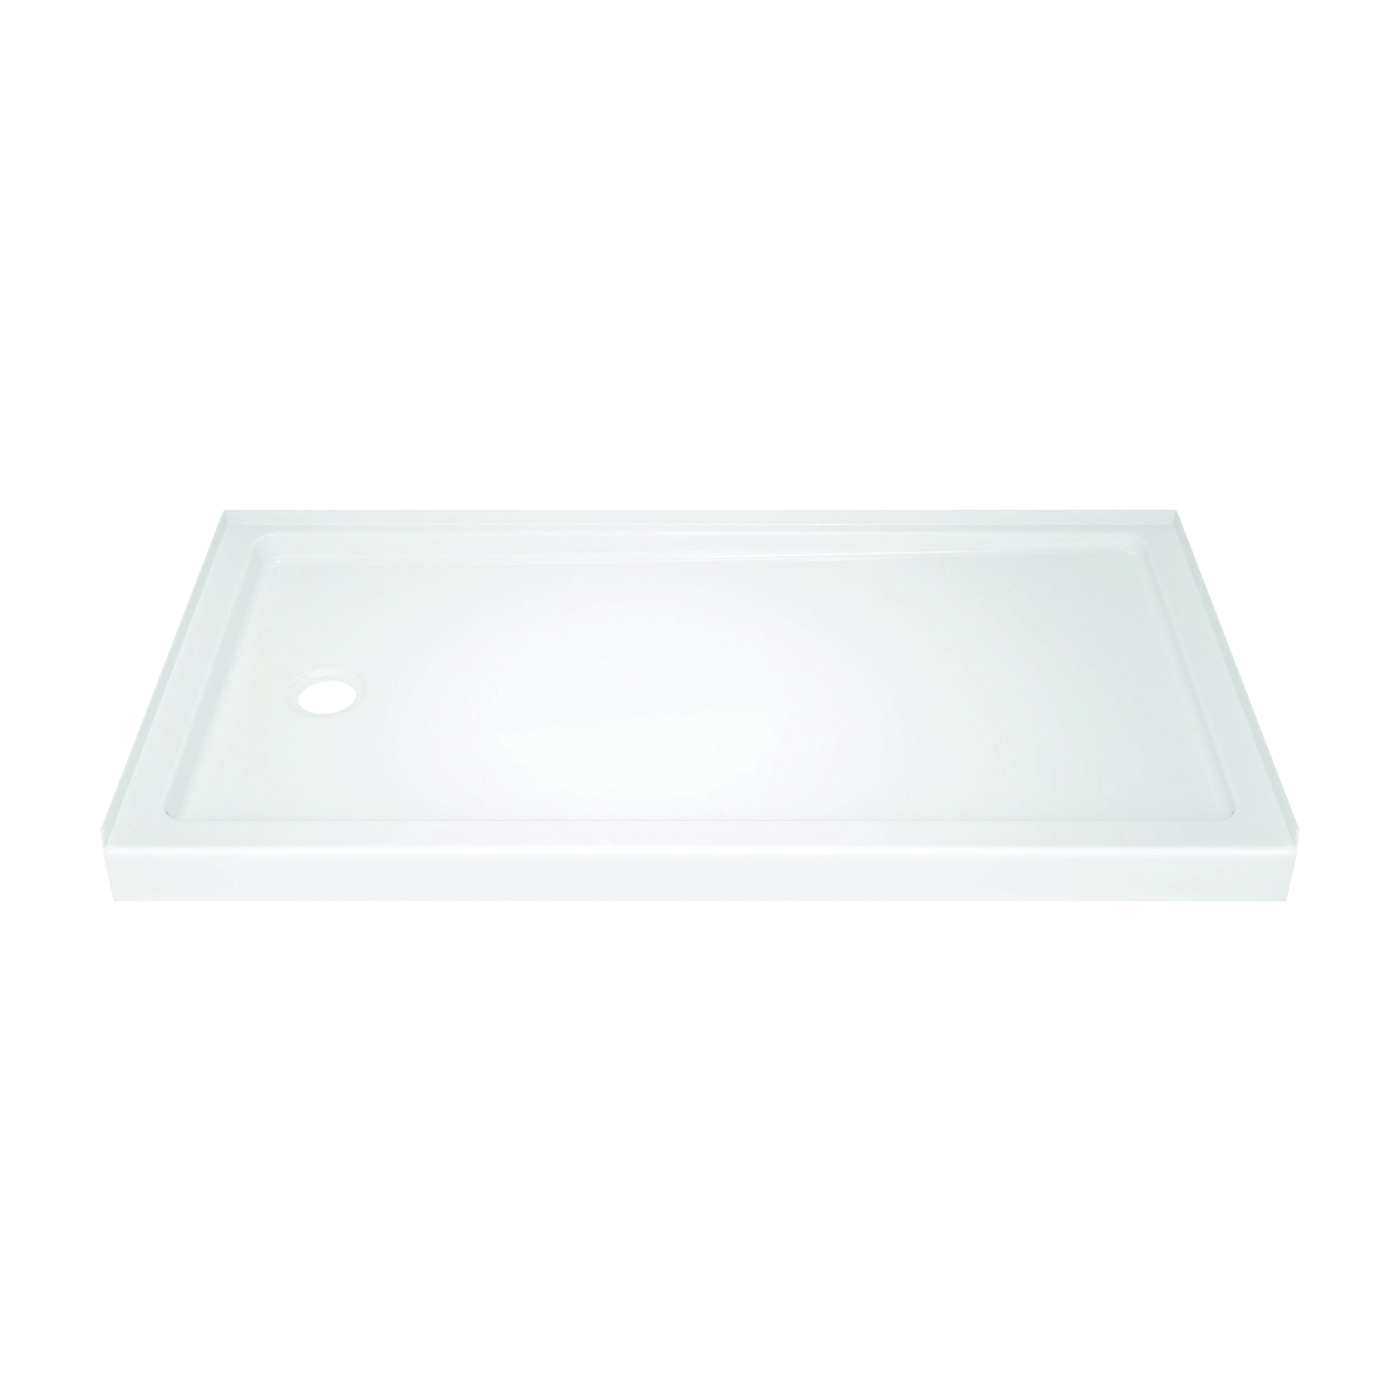 40094L Shower Base, 59.88 in L, 30-3/4 in W, 3-1/2 in H, Acrylic, White, Stud Installation